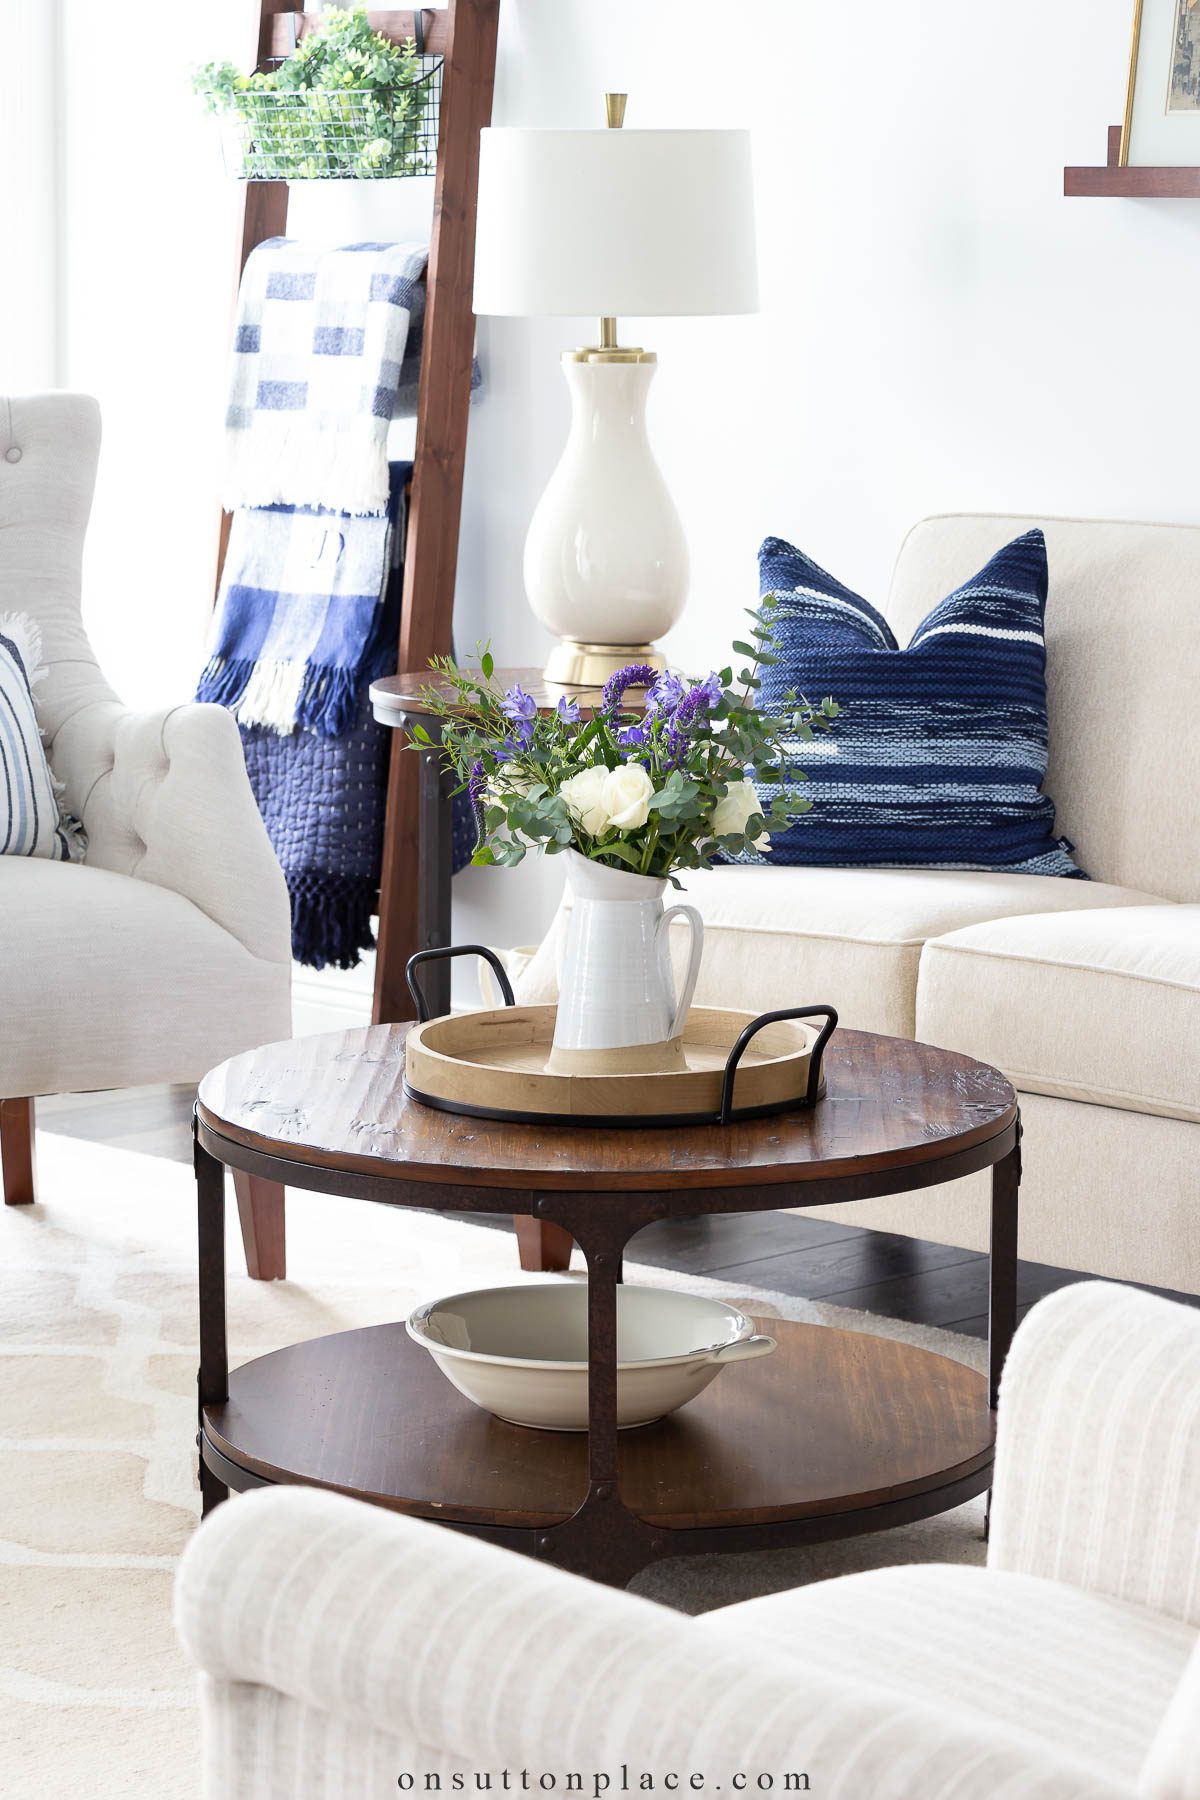 https://www.onsuttonplace.com/wp-content/uploads/2023/01/declutter-your-home-neutral-living-room-with-blue-accents.jpg